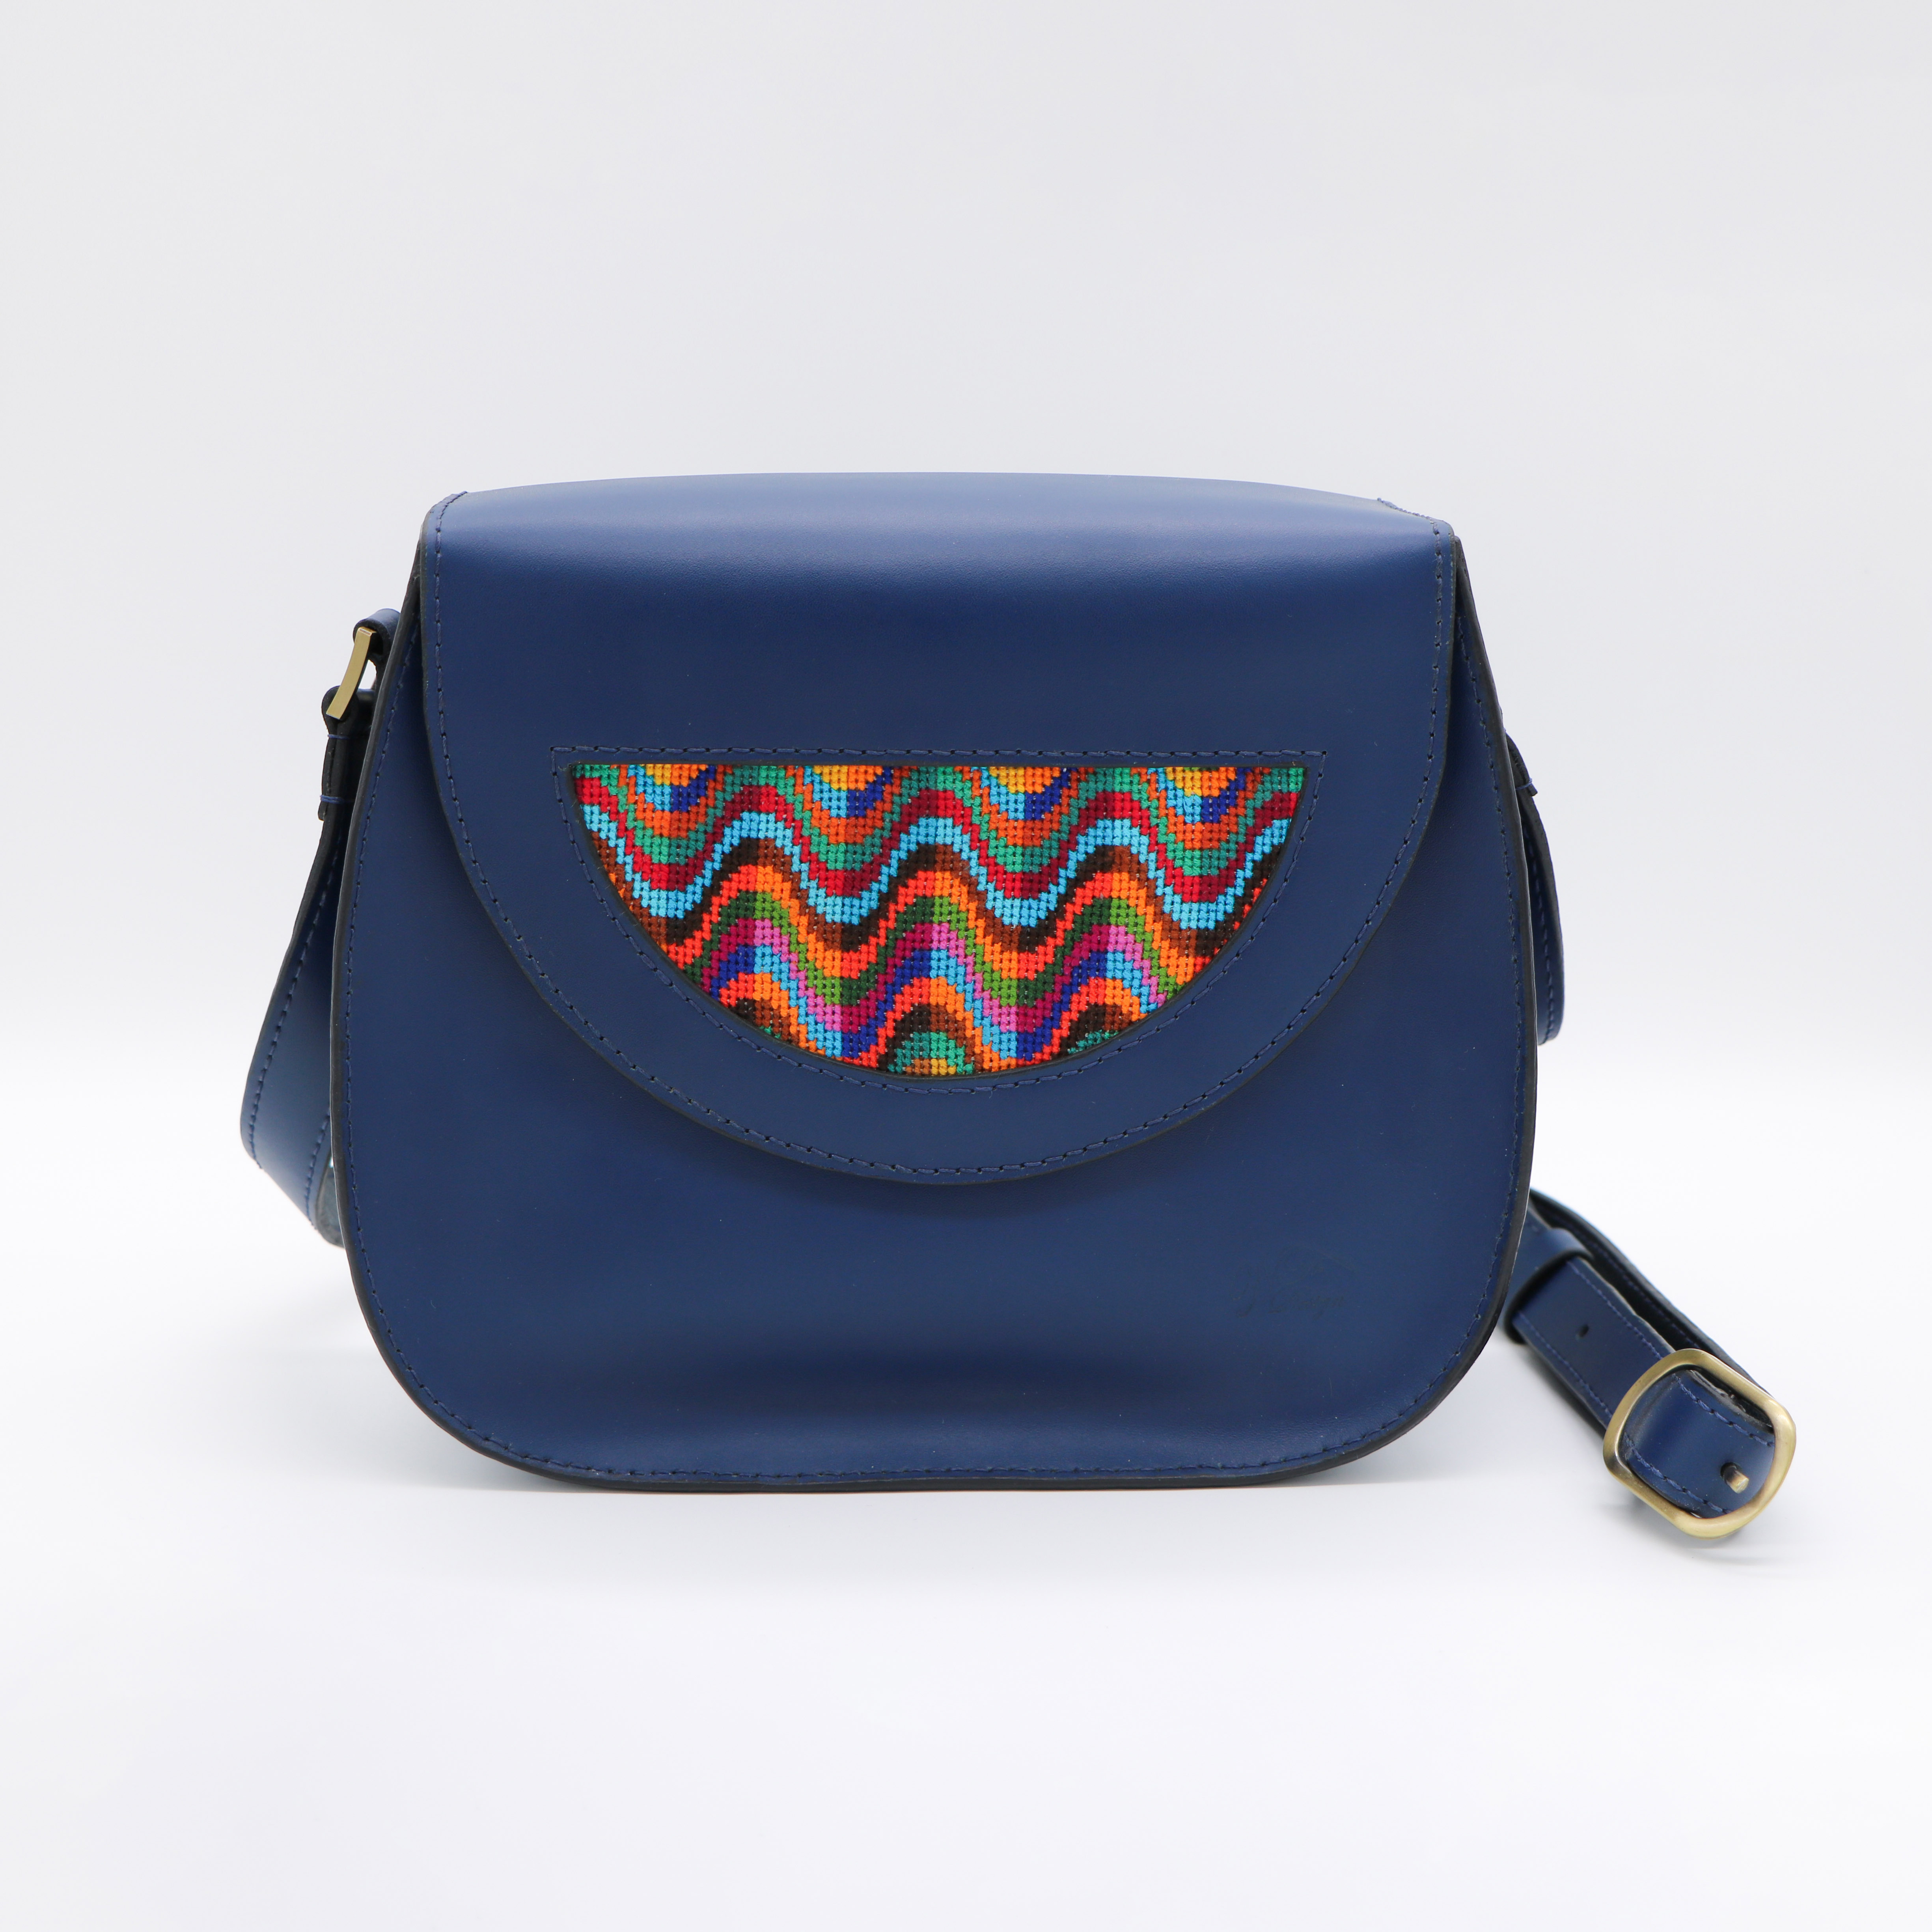 Genuine leather bag with colorful cross stitching 